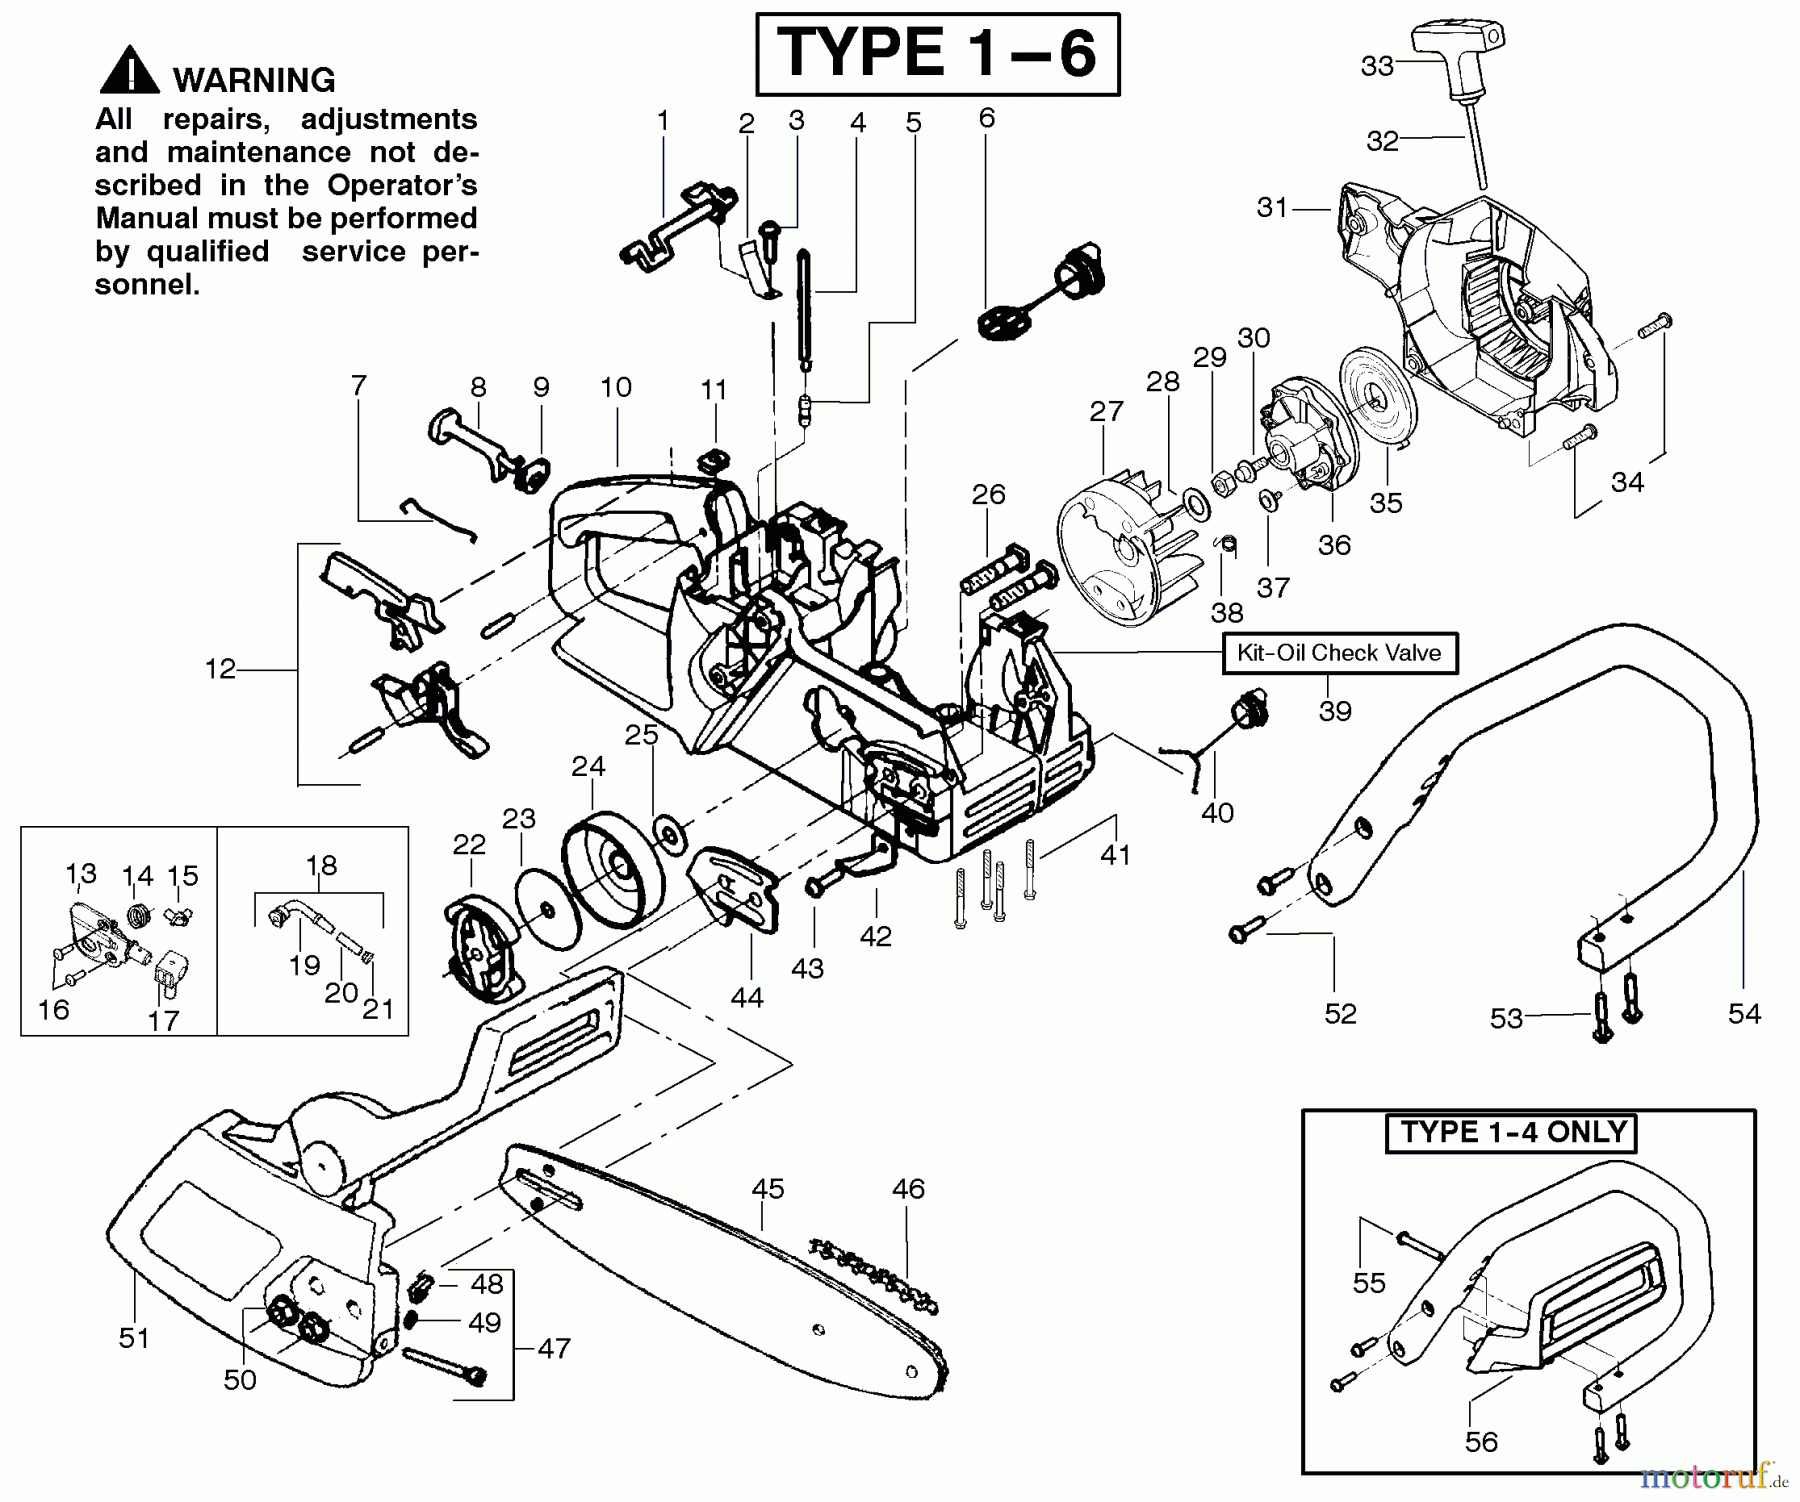  Poulan / Weed Eater Motorsägen 2050 (Type 5) - Poulan Pioneer Chainsaw Handle, Chassis & Bar Assembly Type 1-6